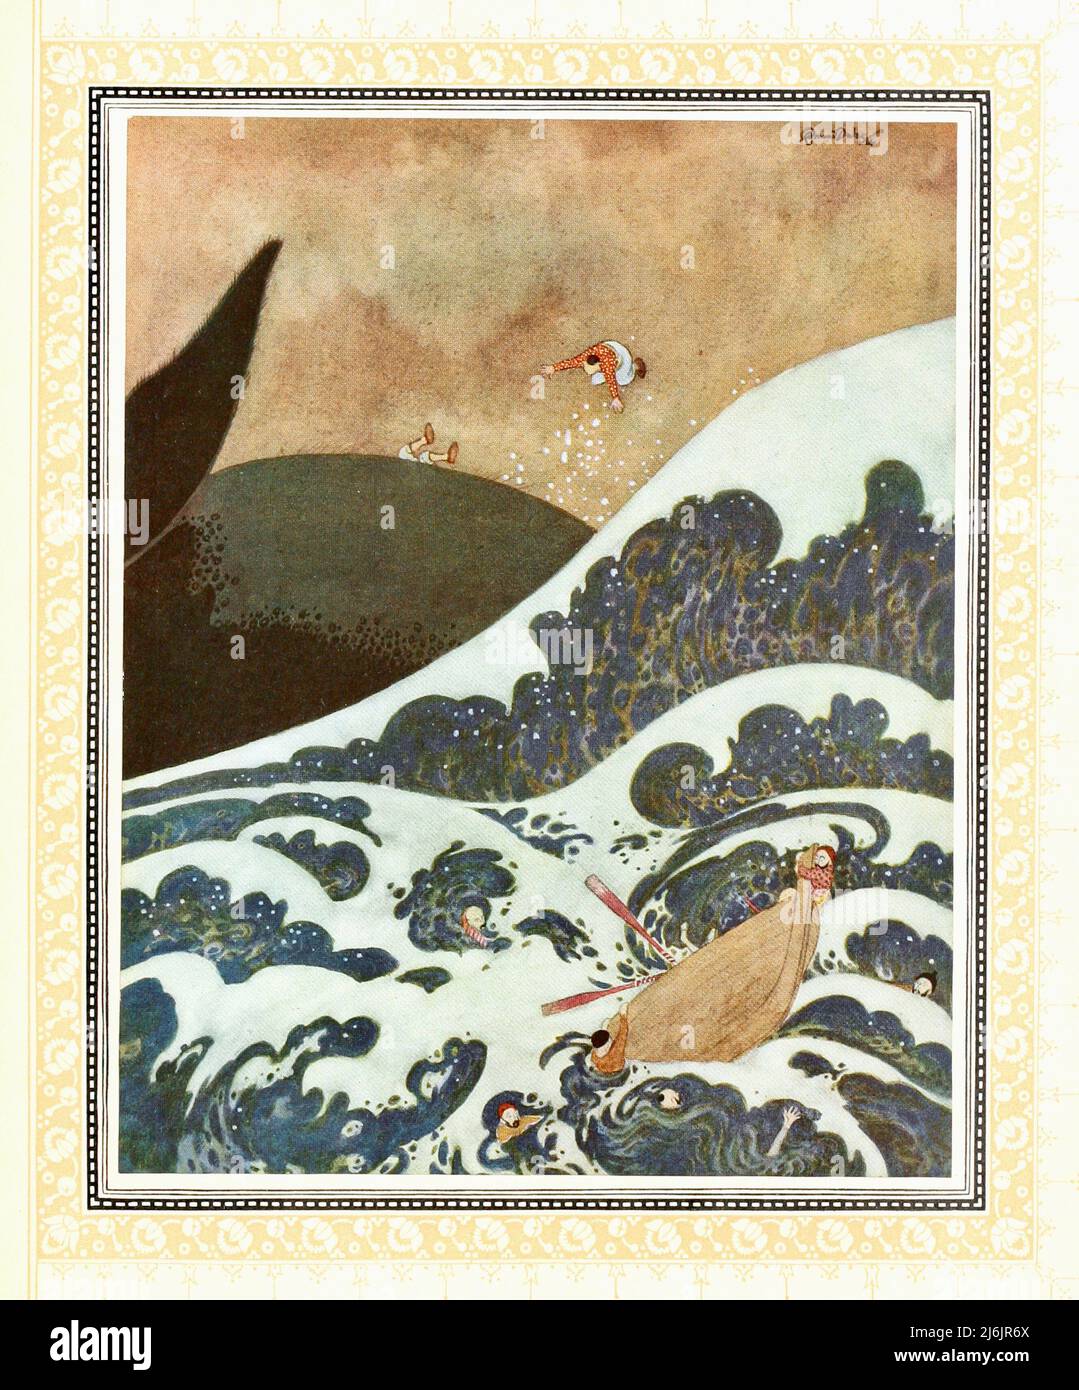 The Episode of the Whale - Edmund Dulac - 1914 - Sinbad the Sailor Stock Photo